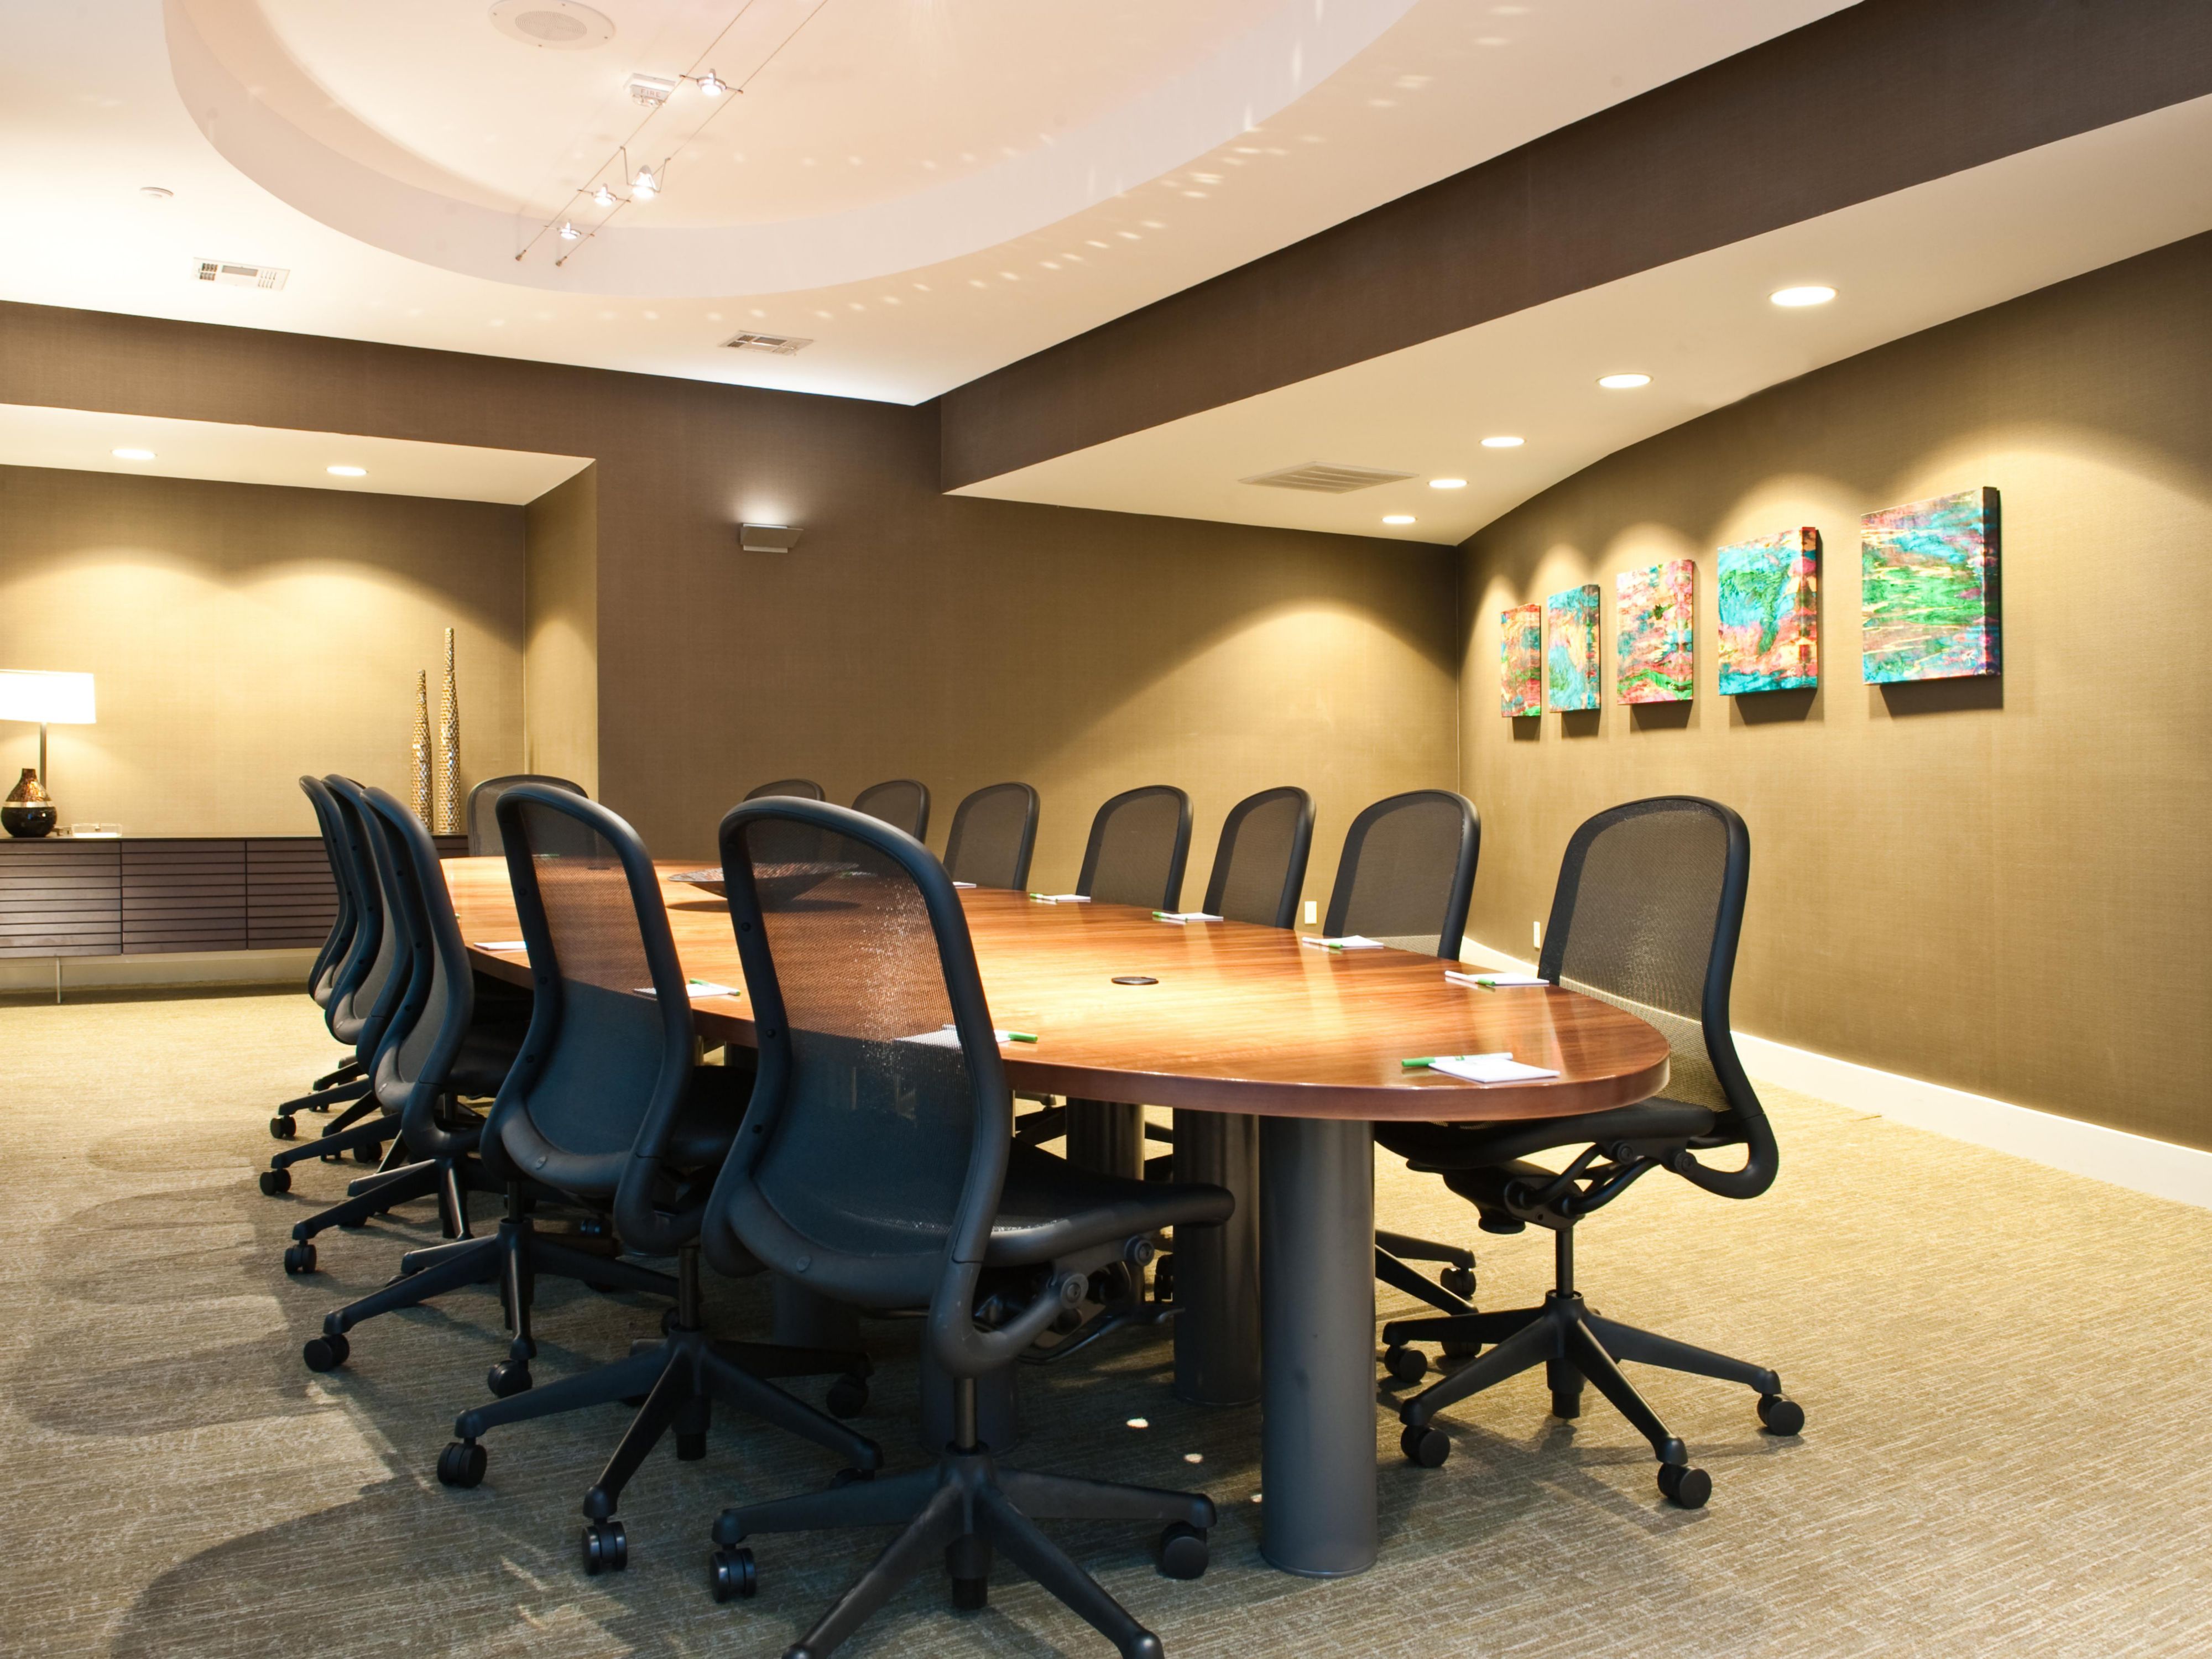 We offer over 2,050 st. ft. of meeting space to accommodate your needs. Call today to book!